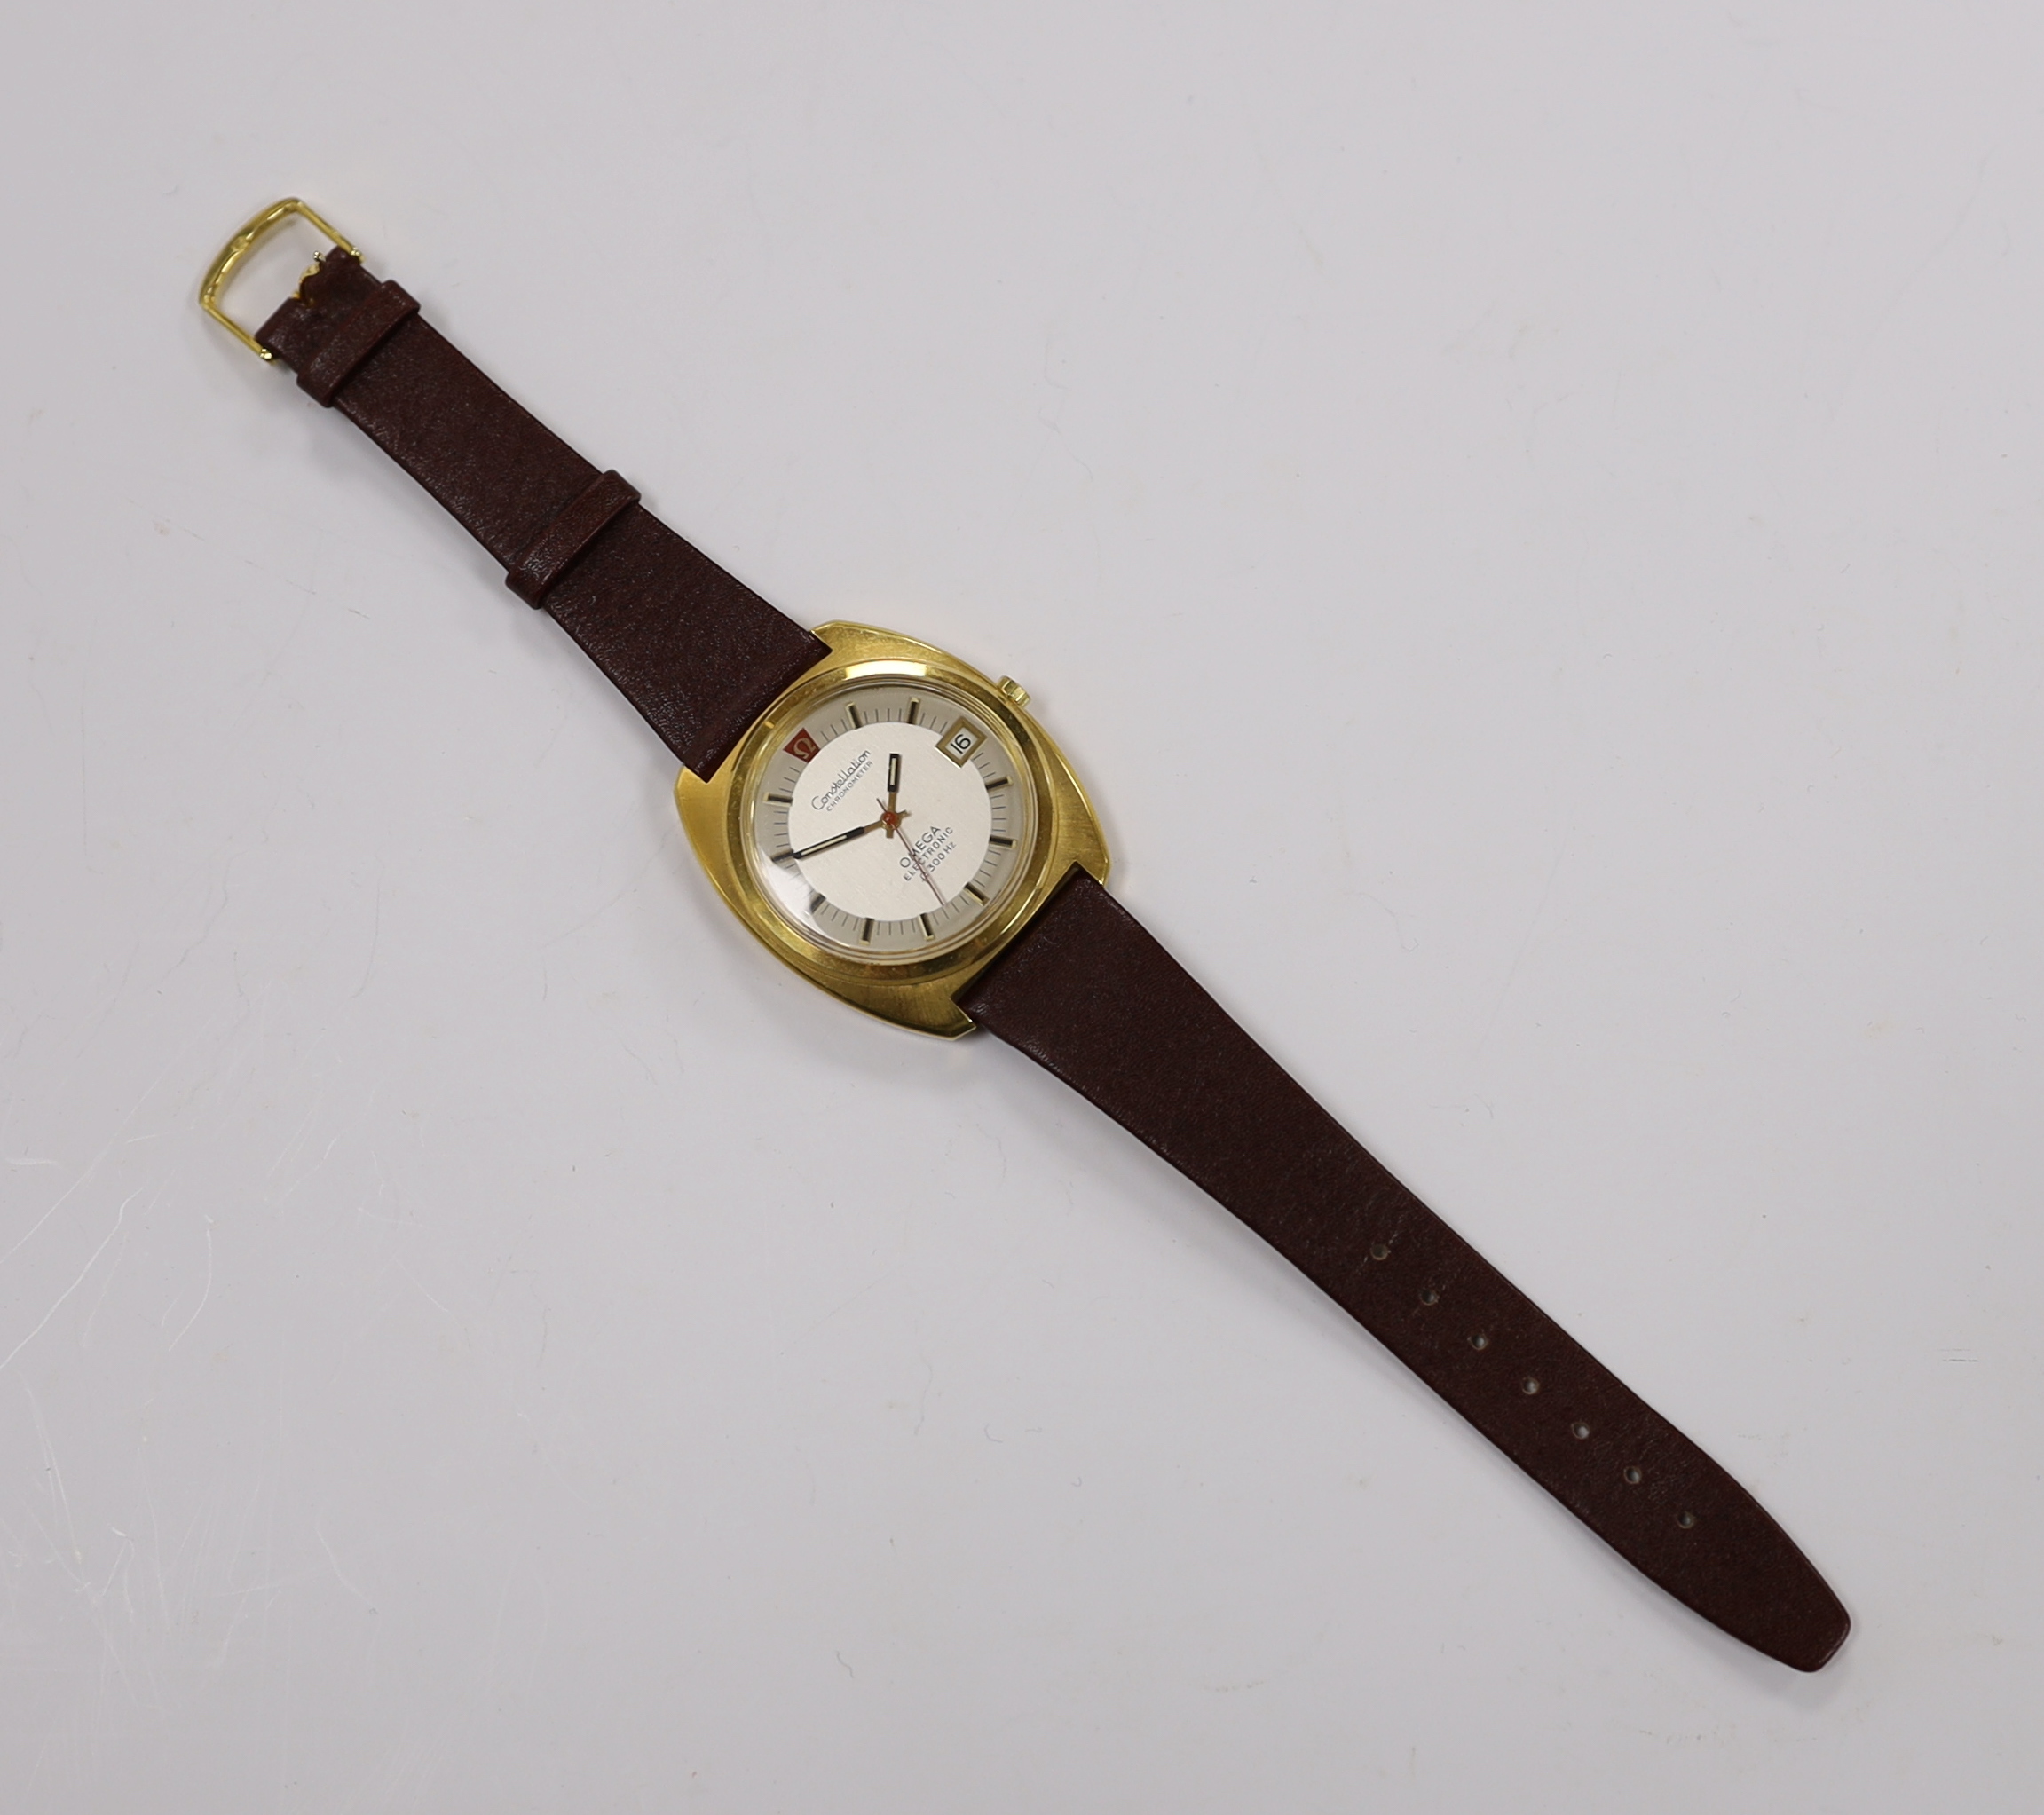 A gentleman's steel and gold plated Omega Constellation Electronic wrist watch, on associated strap, case diameter 38mm.